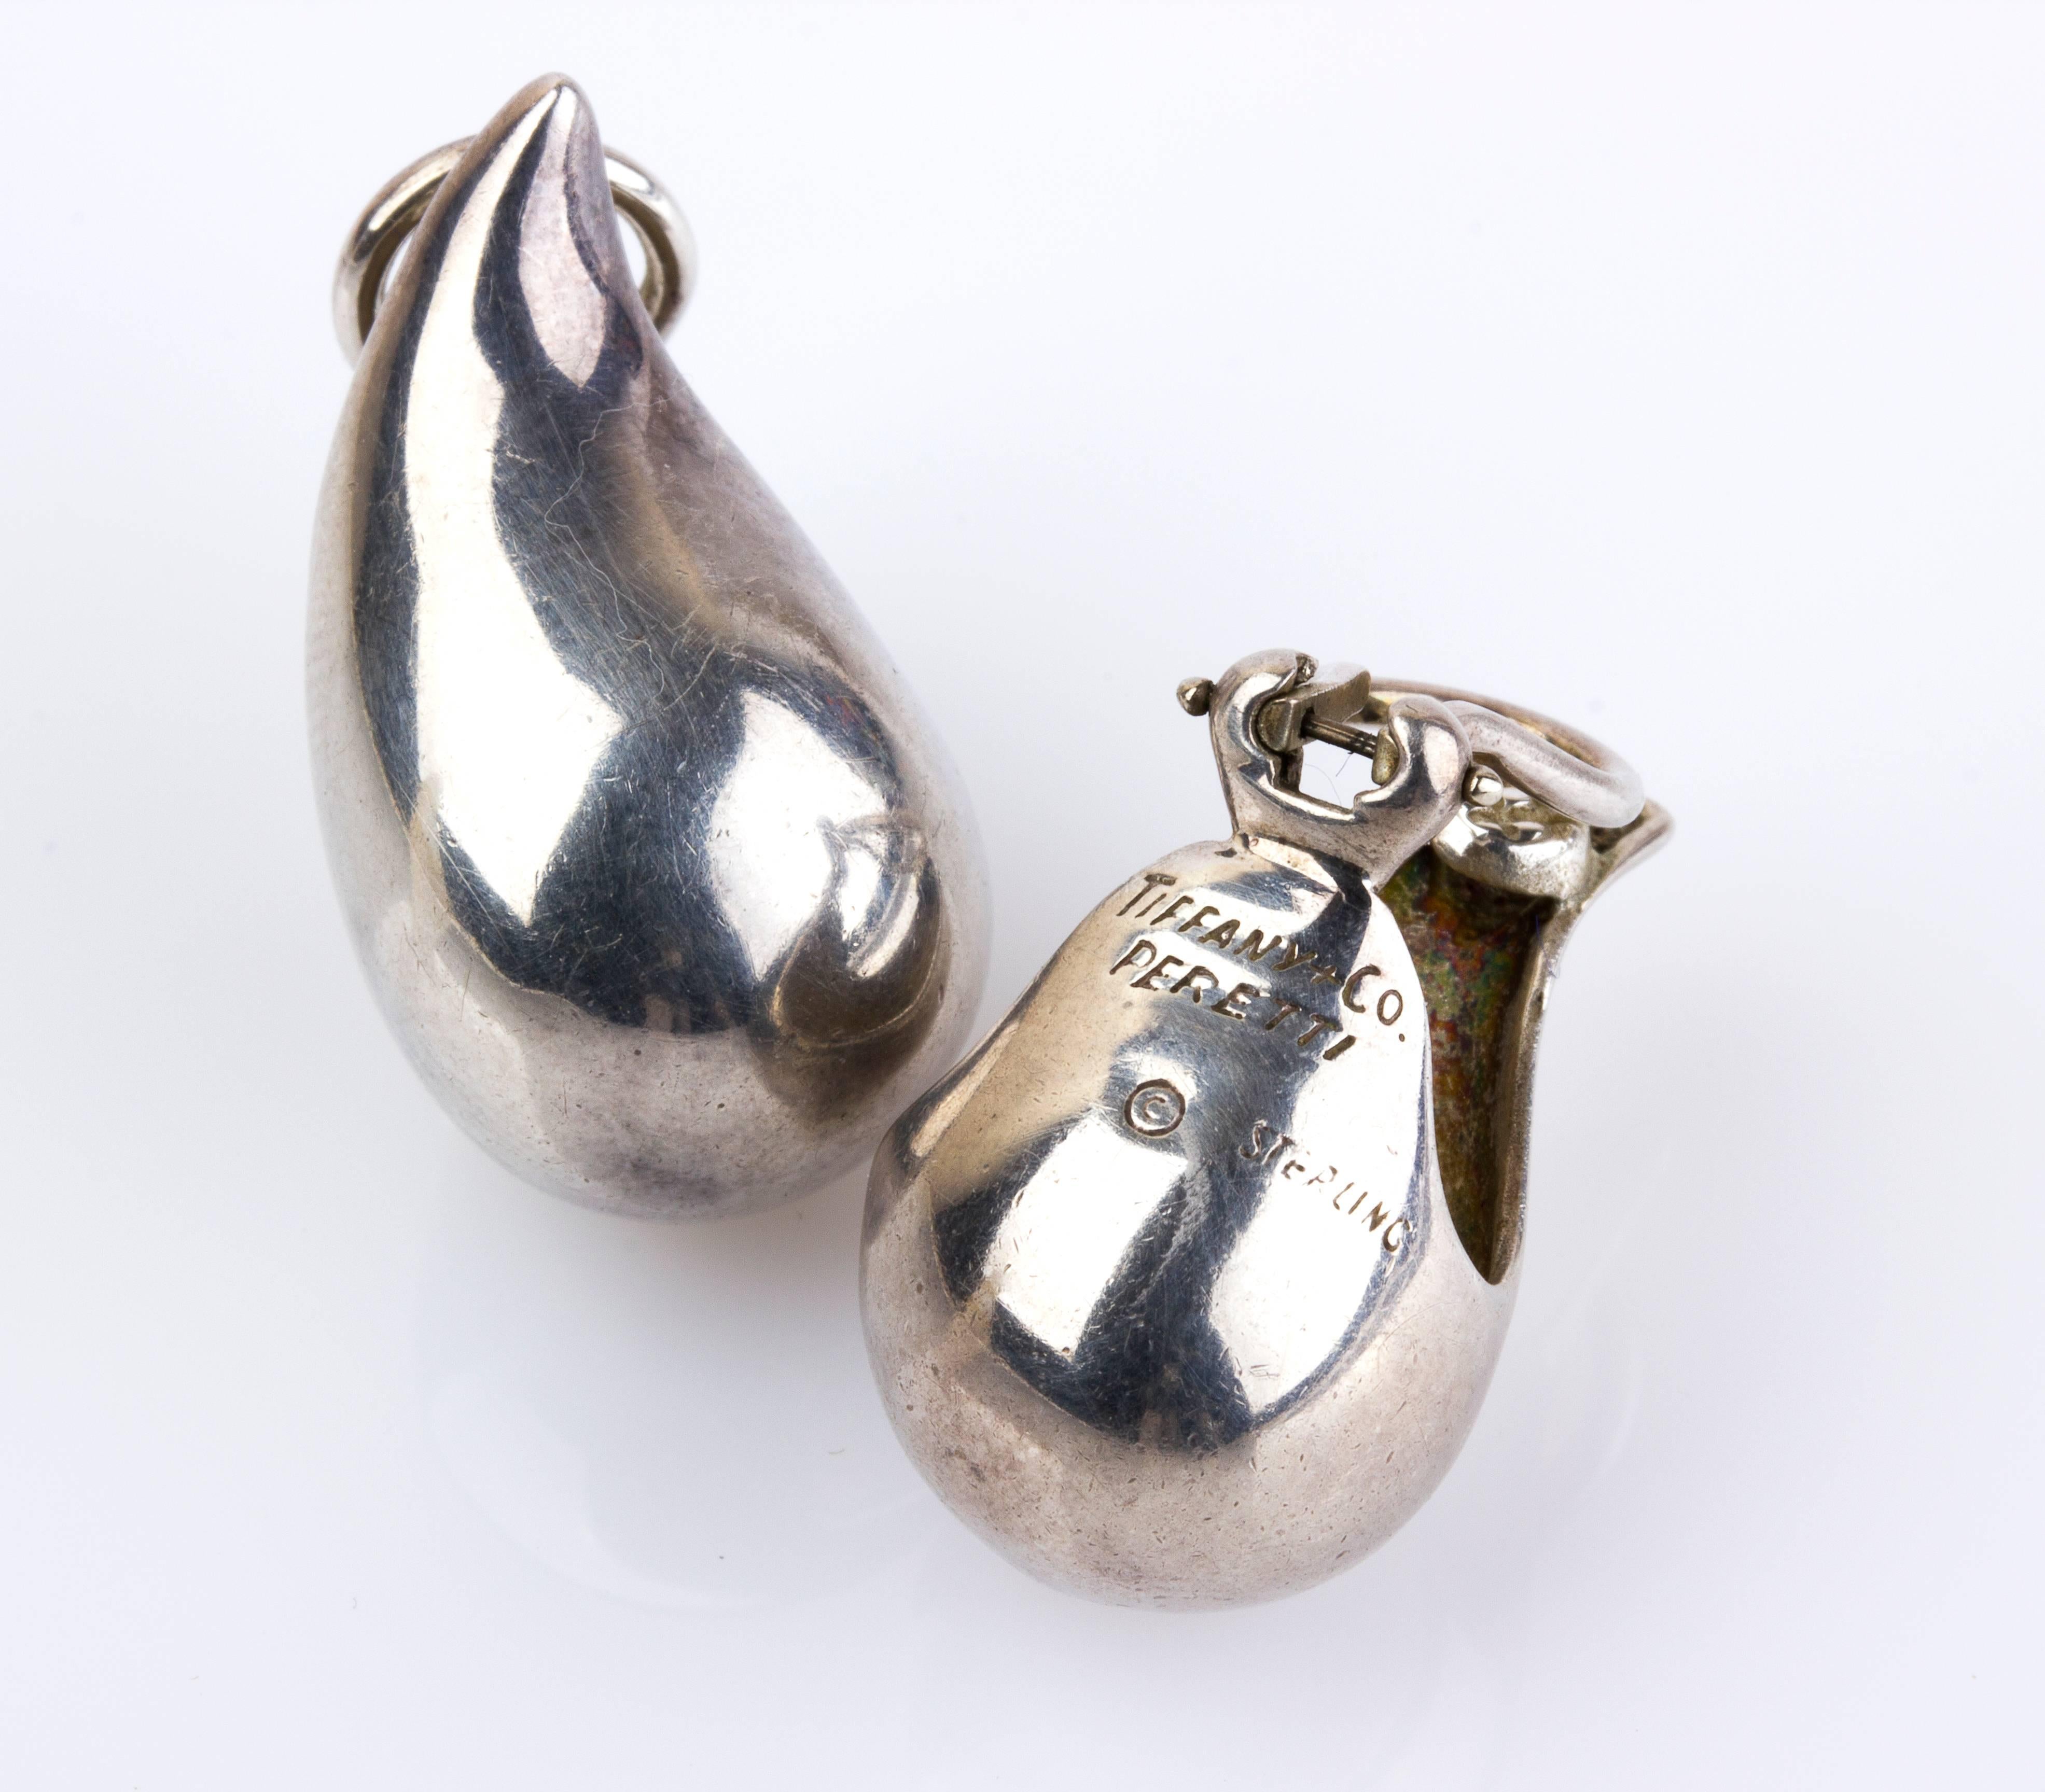 Teardrop collection earrings. Lenght 2.5 cm. Weight 9.25 gr. 